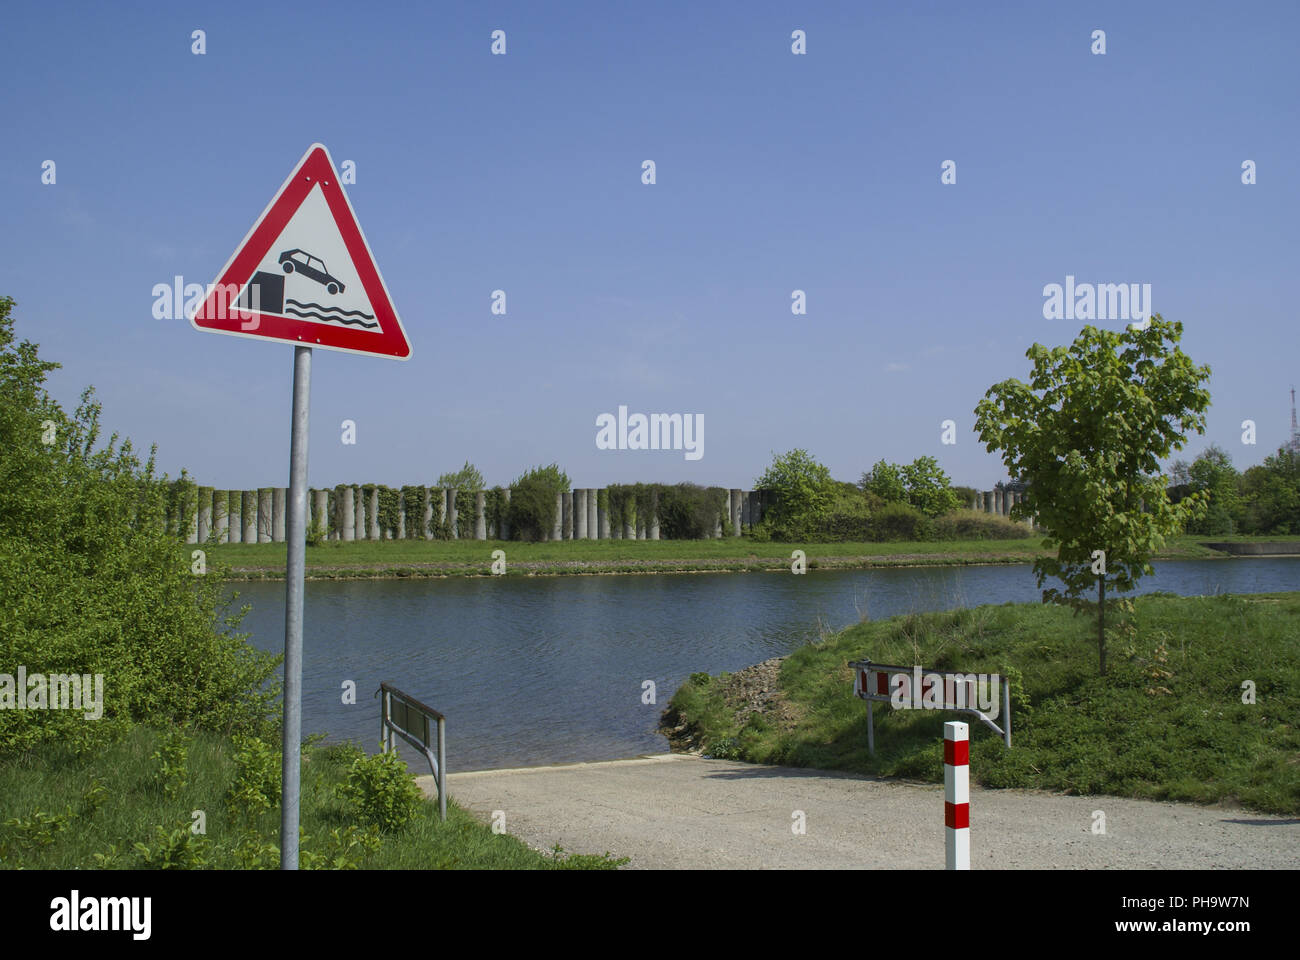 Danger sign nearby the Main-Danube-Channel, Nuremberg, Germany Stock Photo